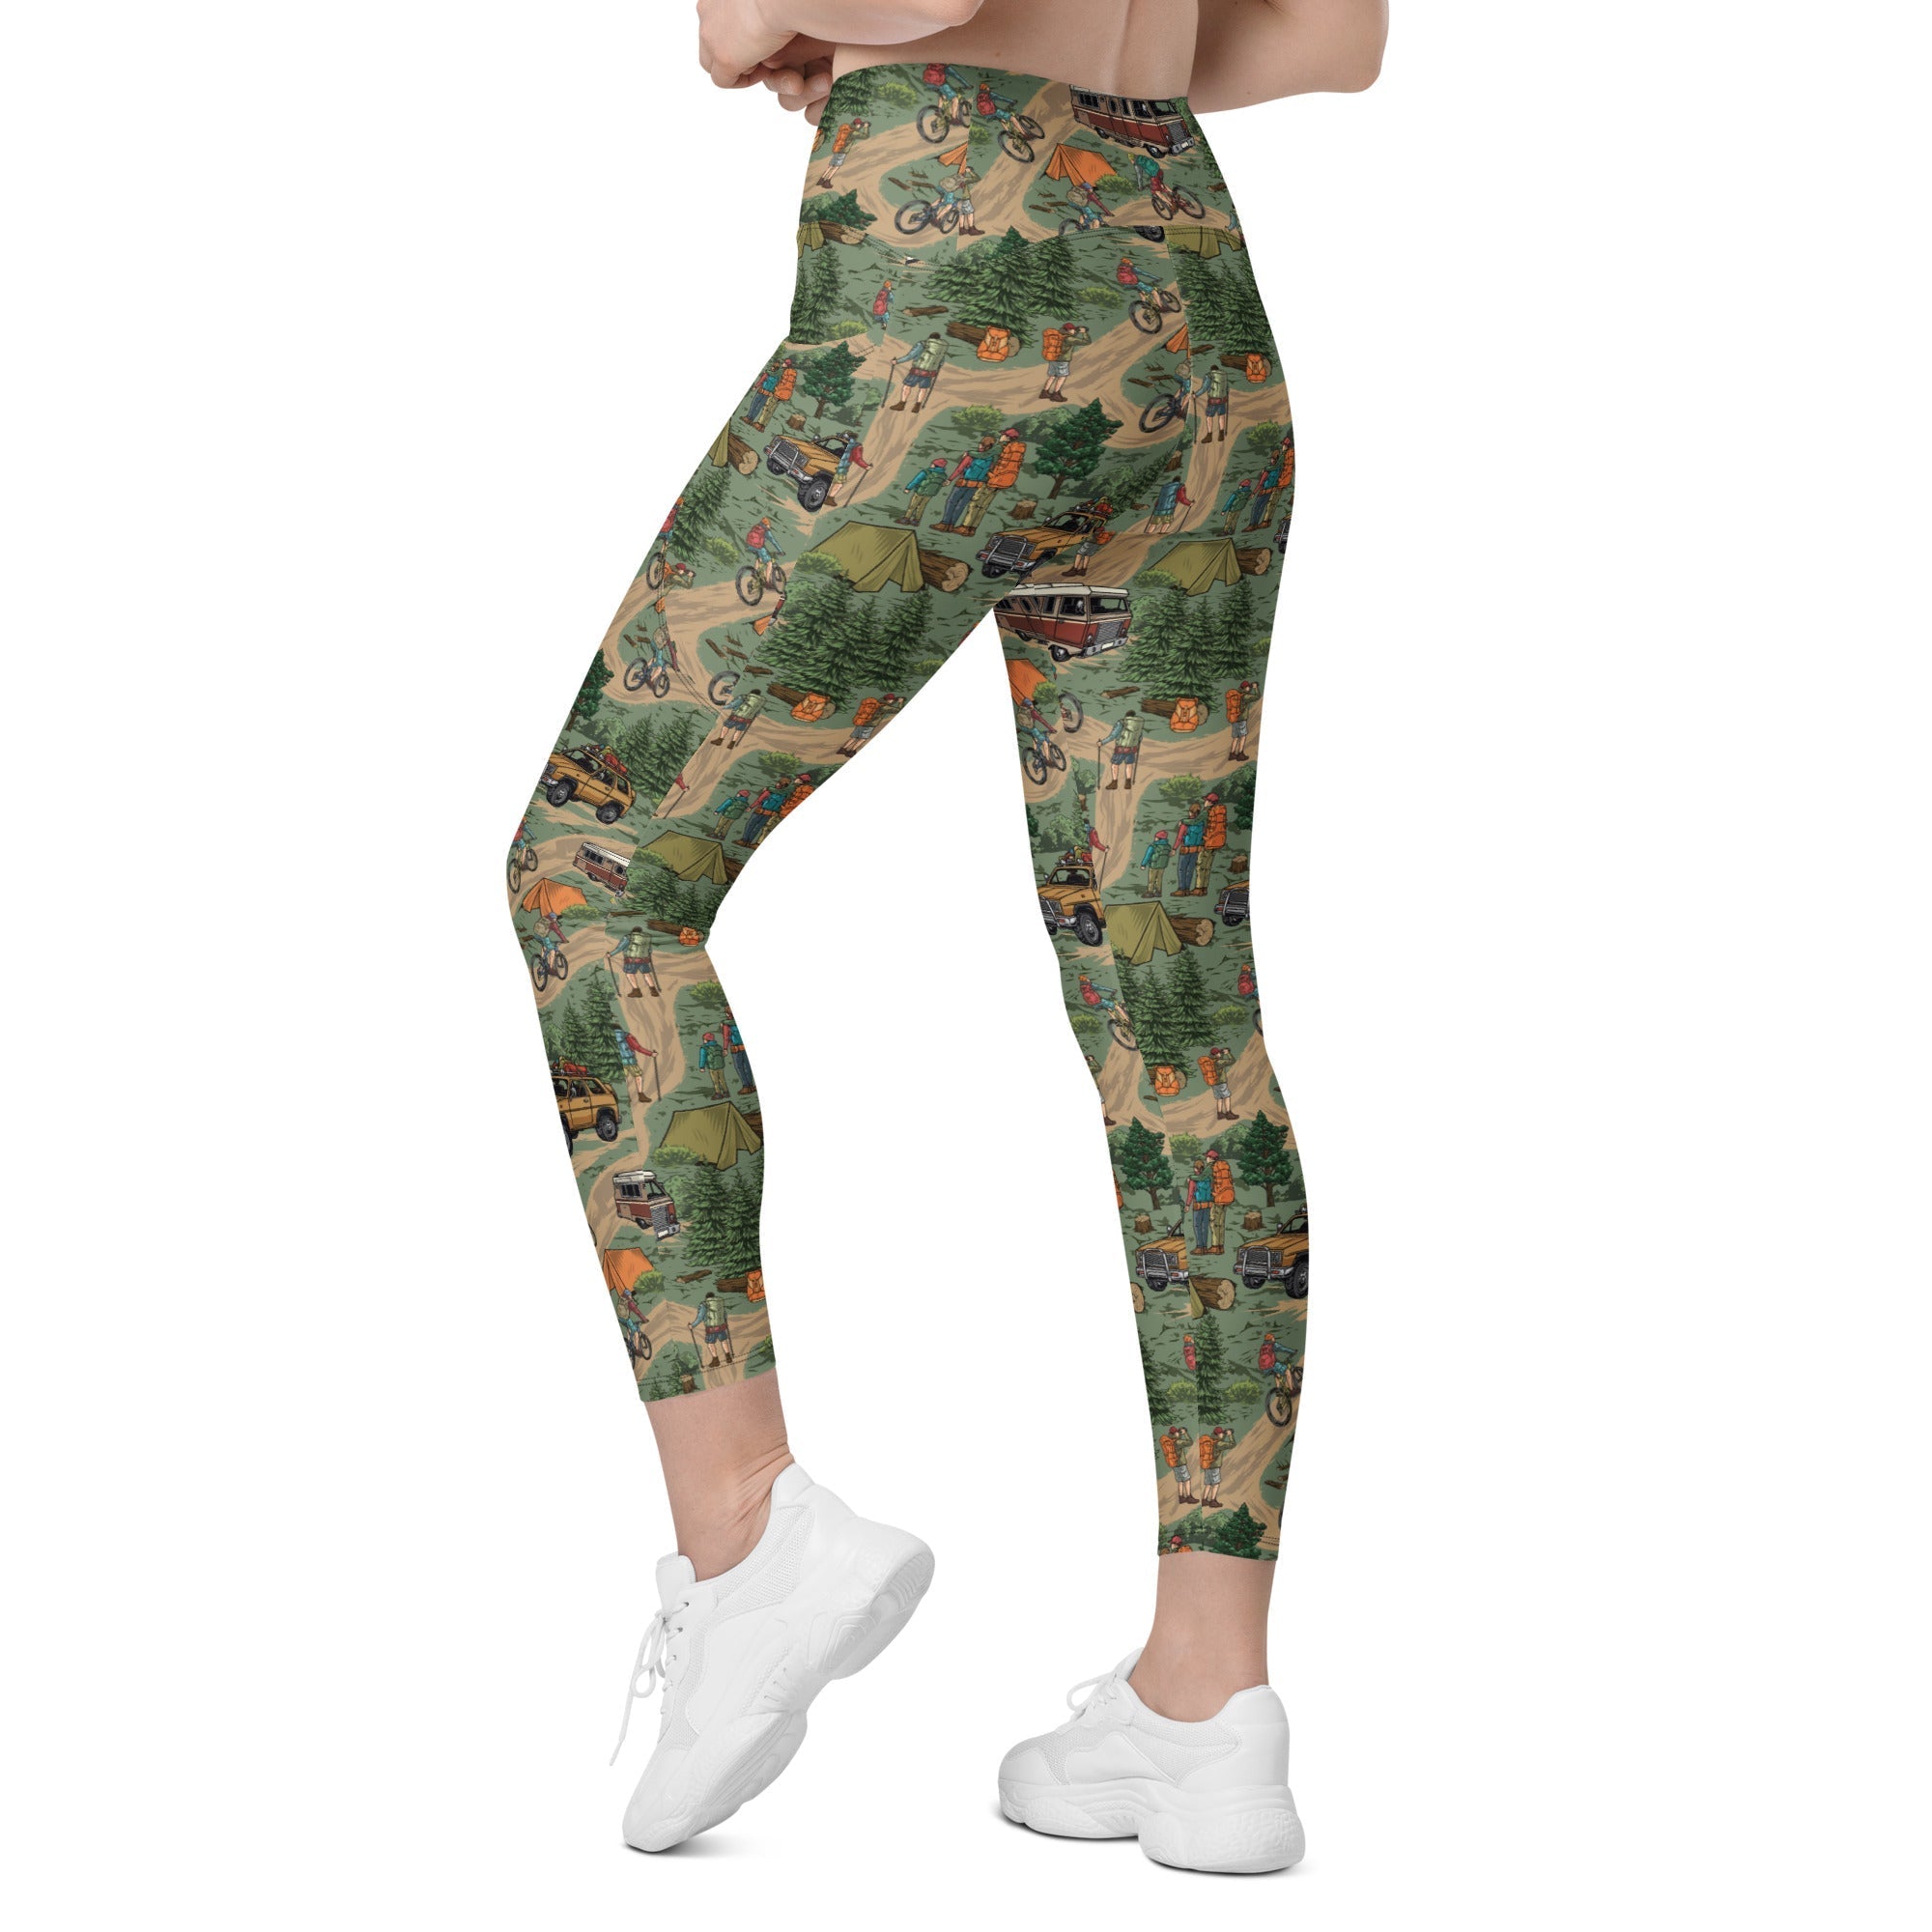 Hiking Leggings With Pockets